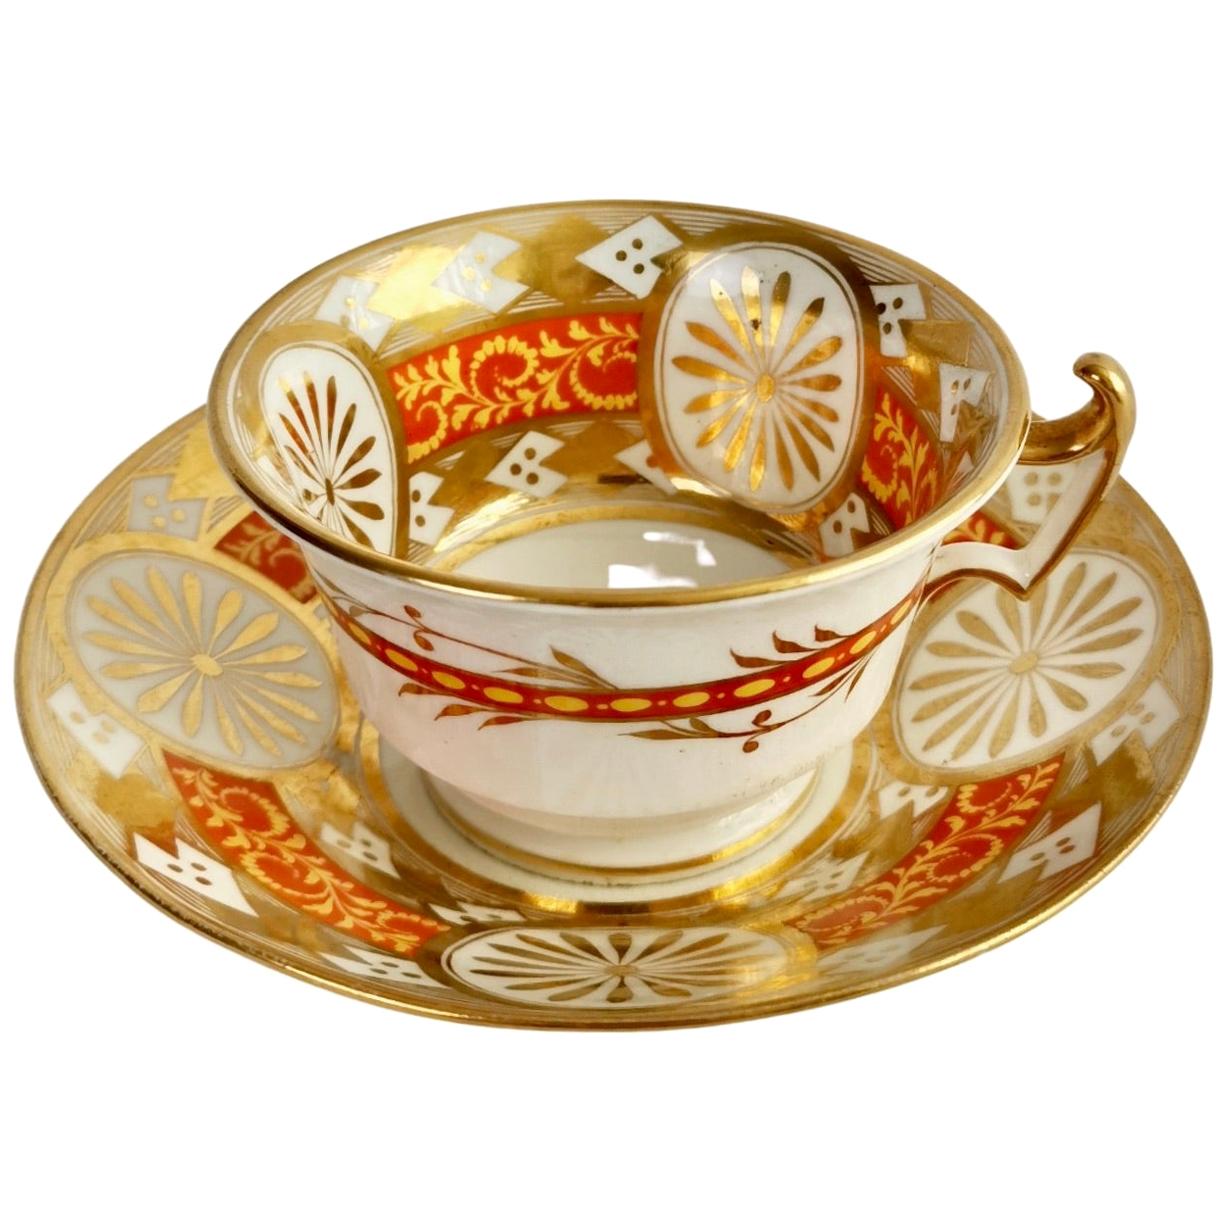 Anstice, Horton & Rose Teacup, Geometric Gilt, Yellow and Red, Regency